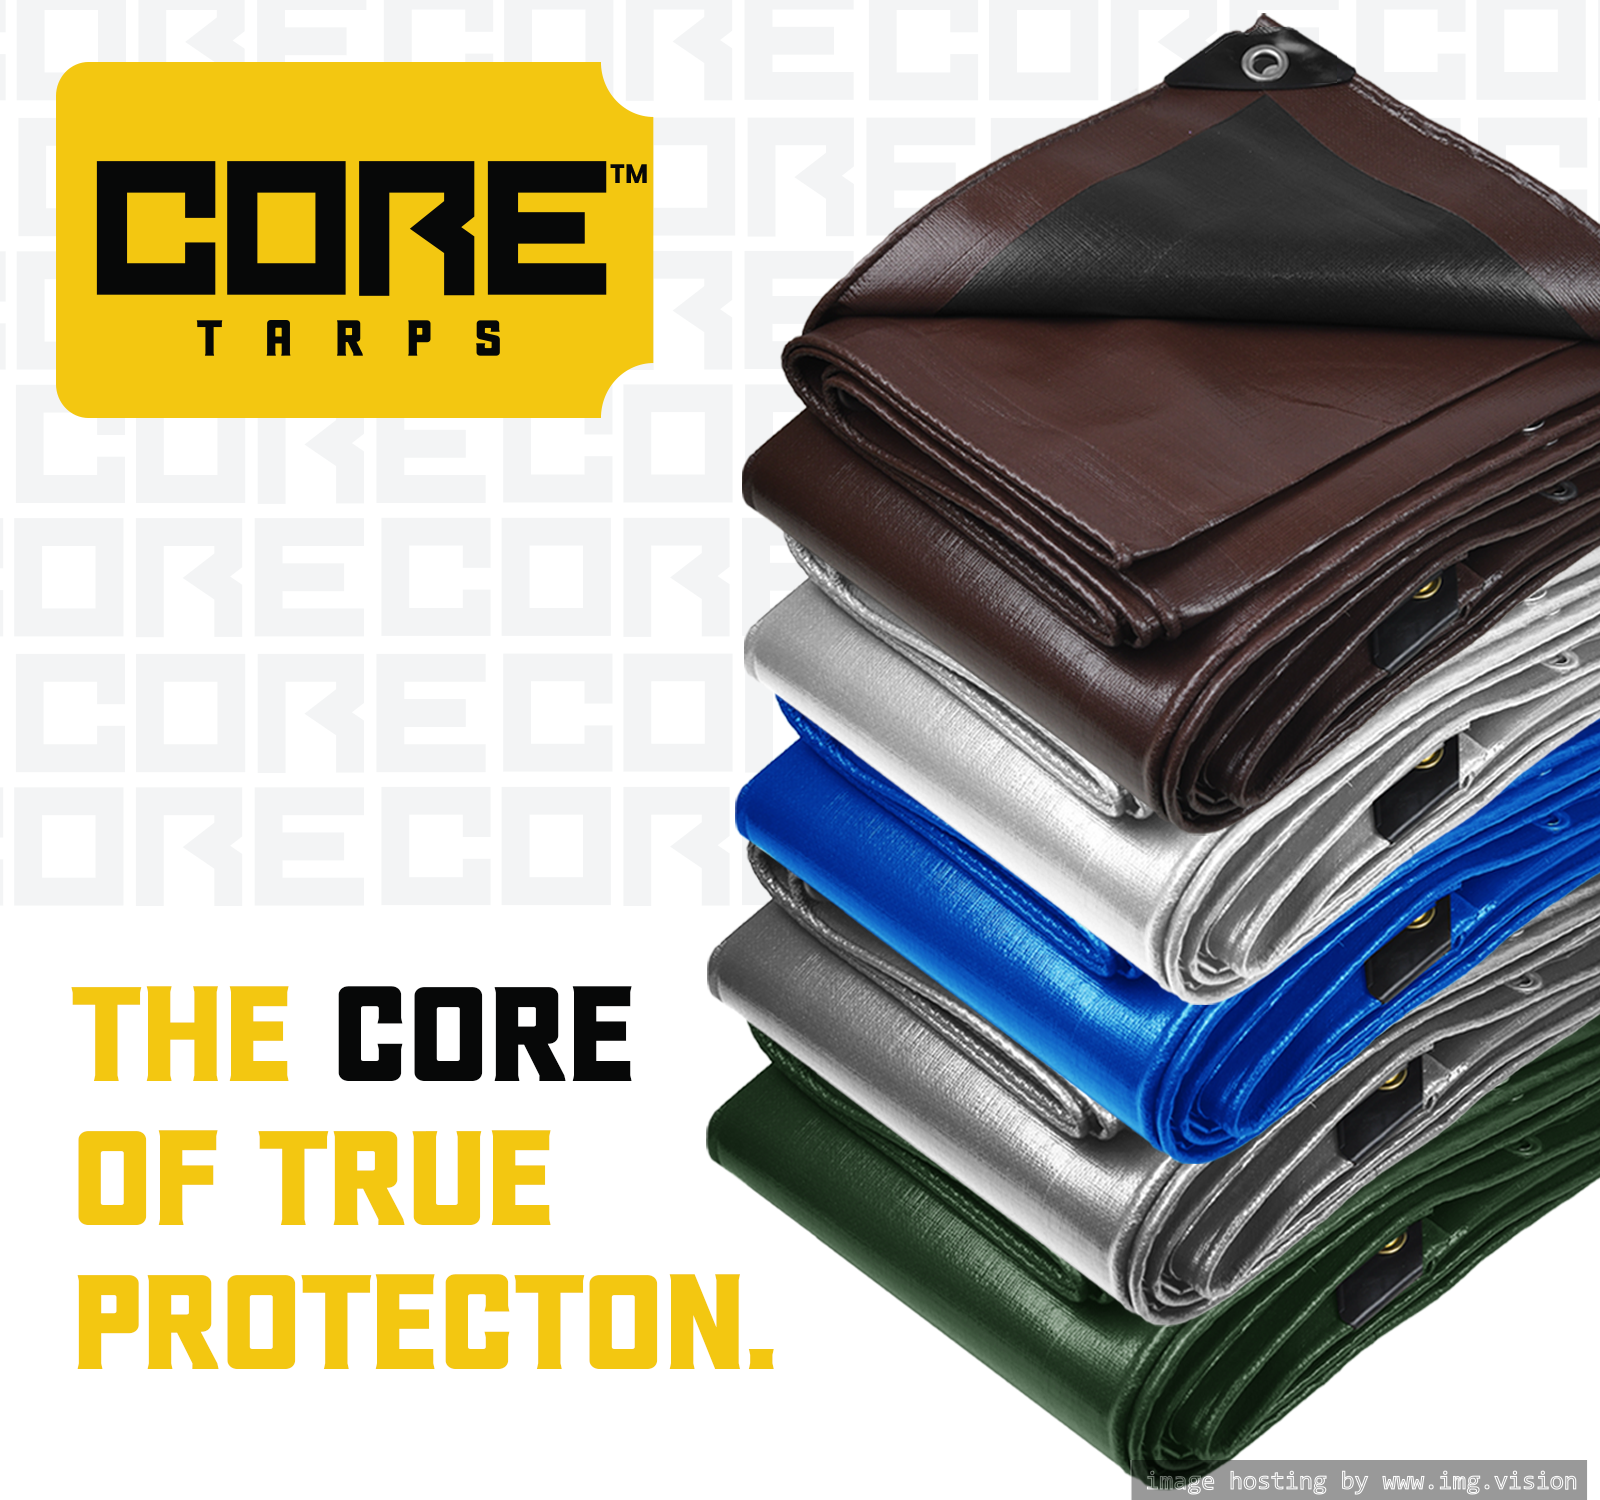 Core Tarps Extreme Heavy Duty 20 Mil Tarp Cover 9′ X 12′ Blue UV Resistant, Rip and Tear Proof.